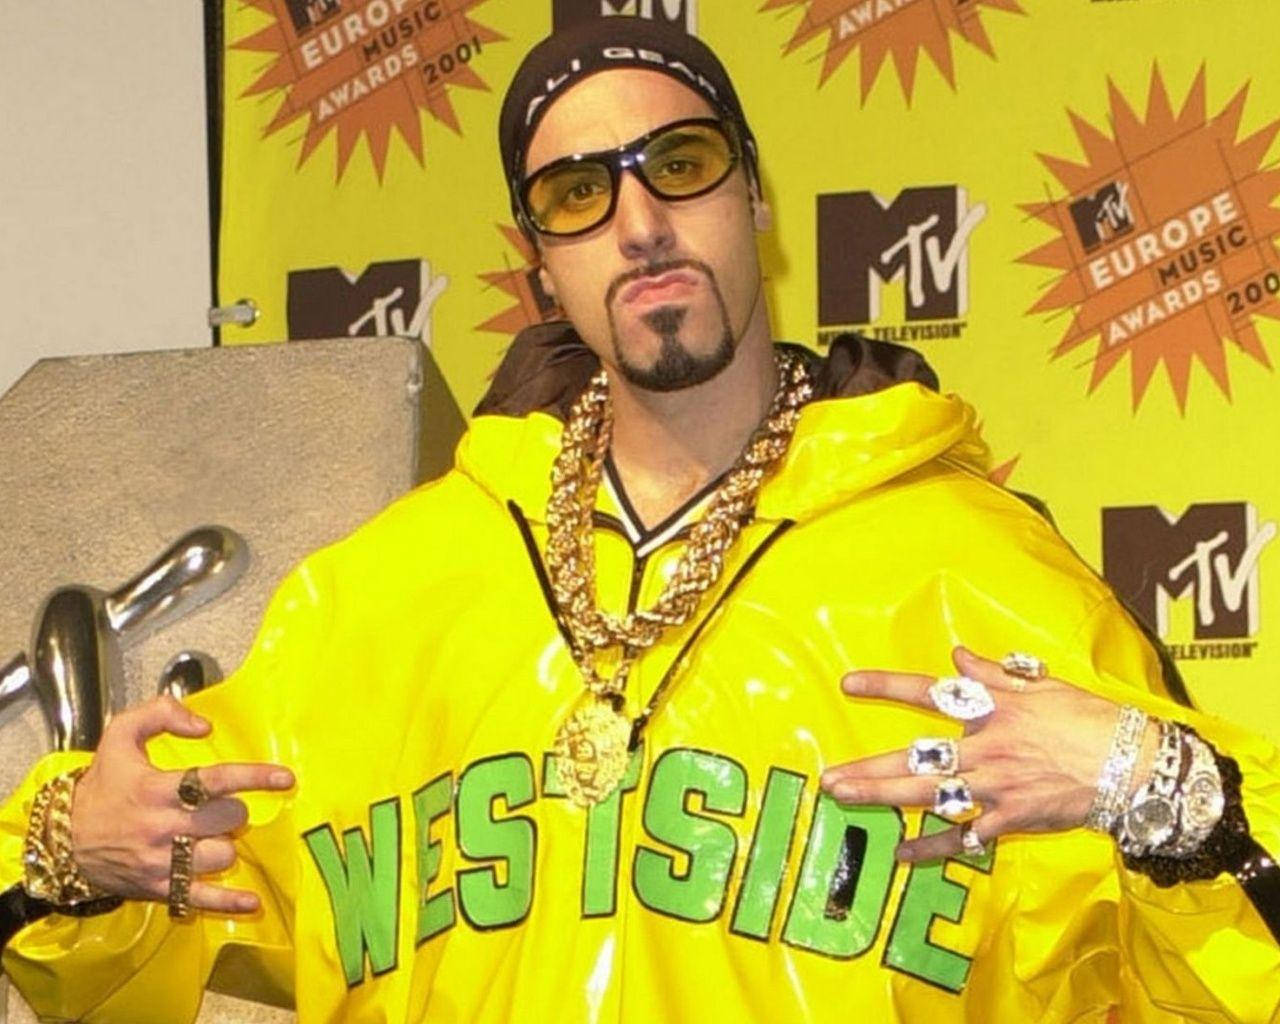 Sacha Baron Cohen in character as Ali G from his popular TV show Wallpaper